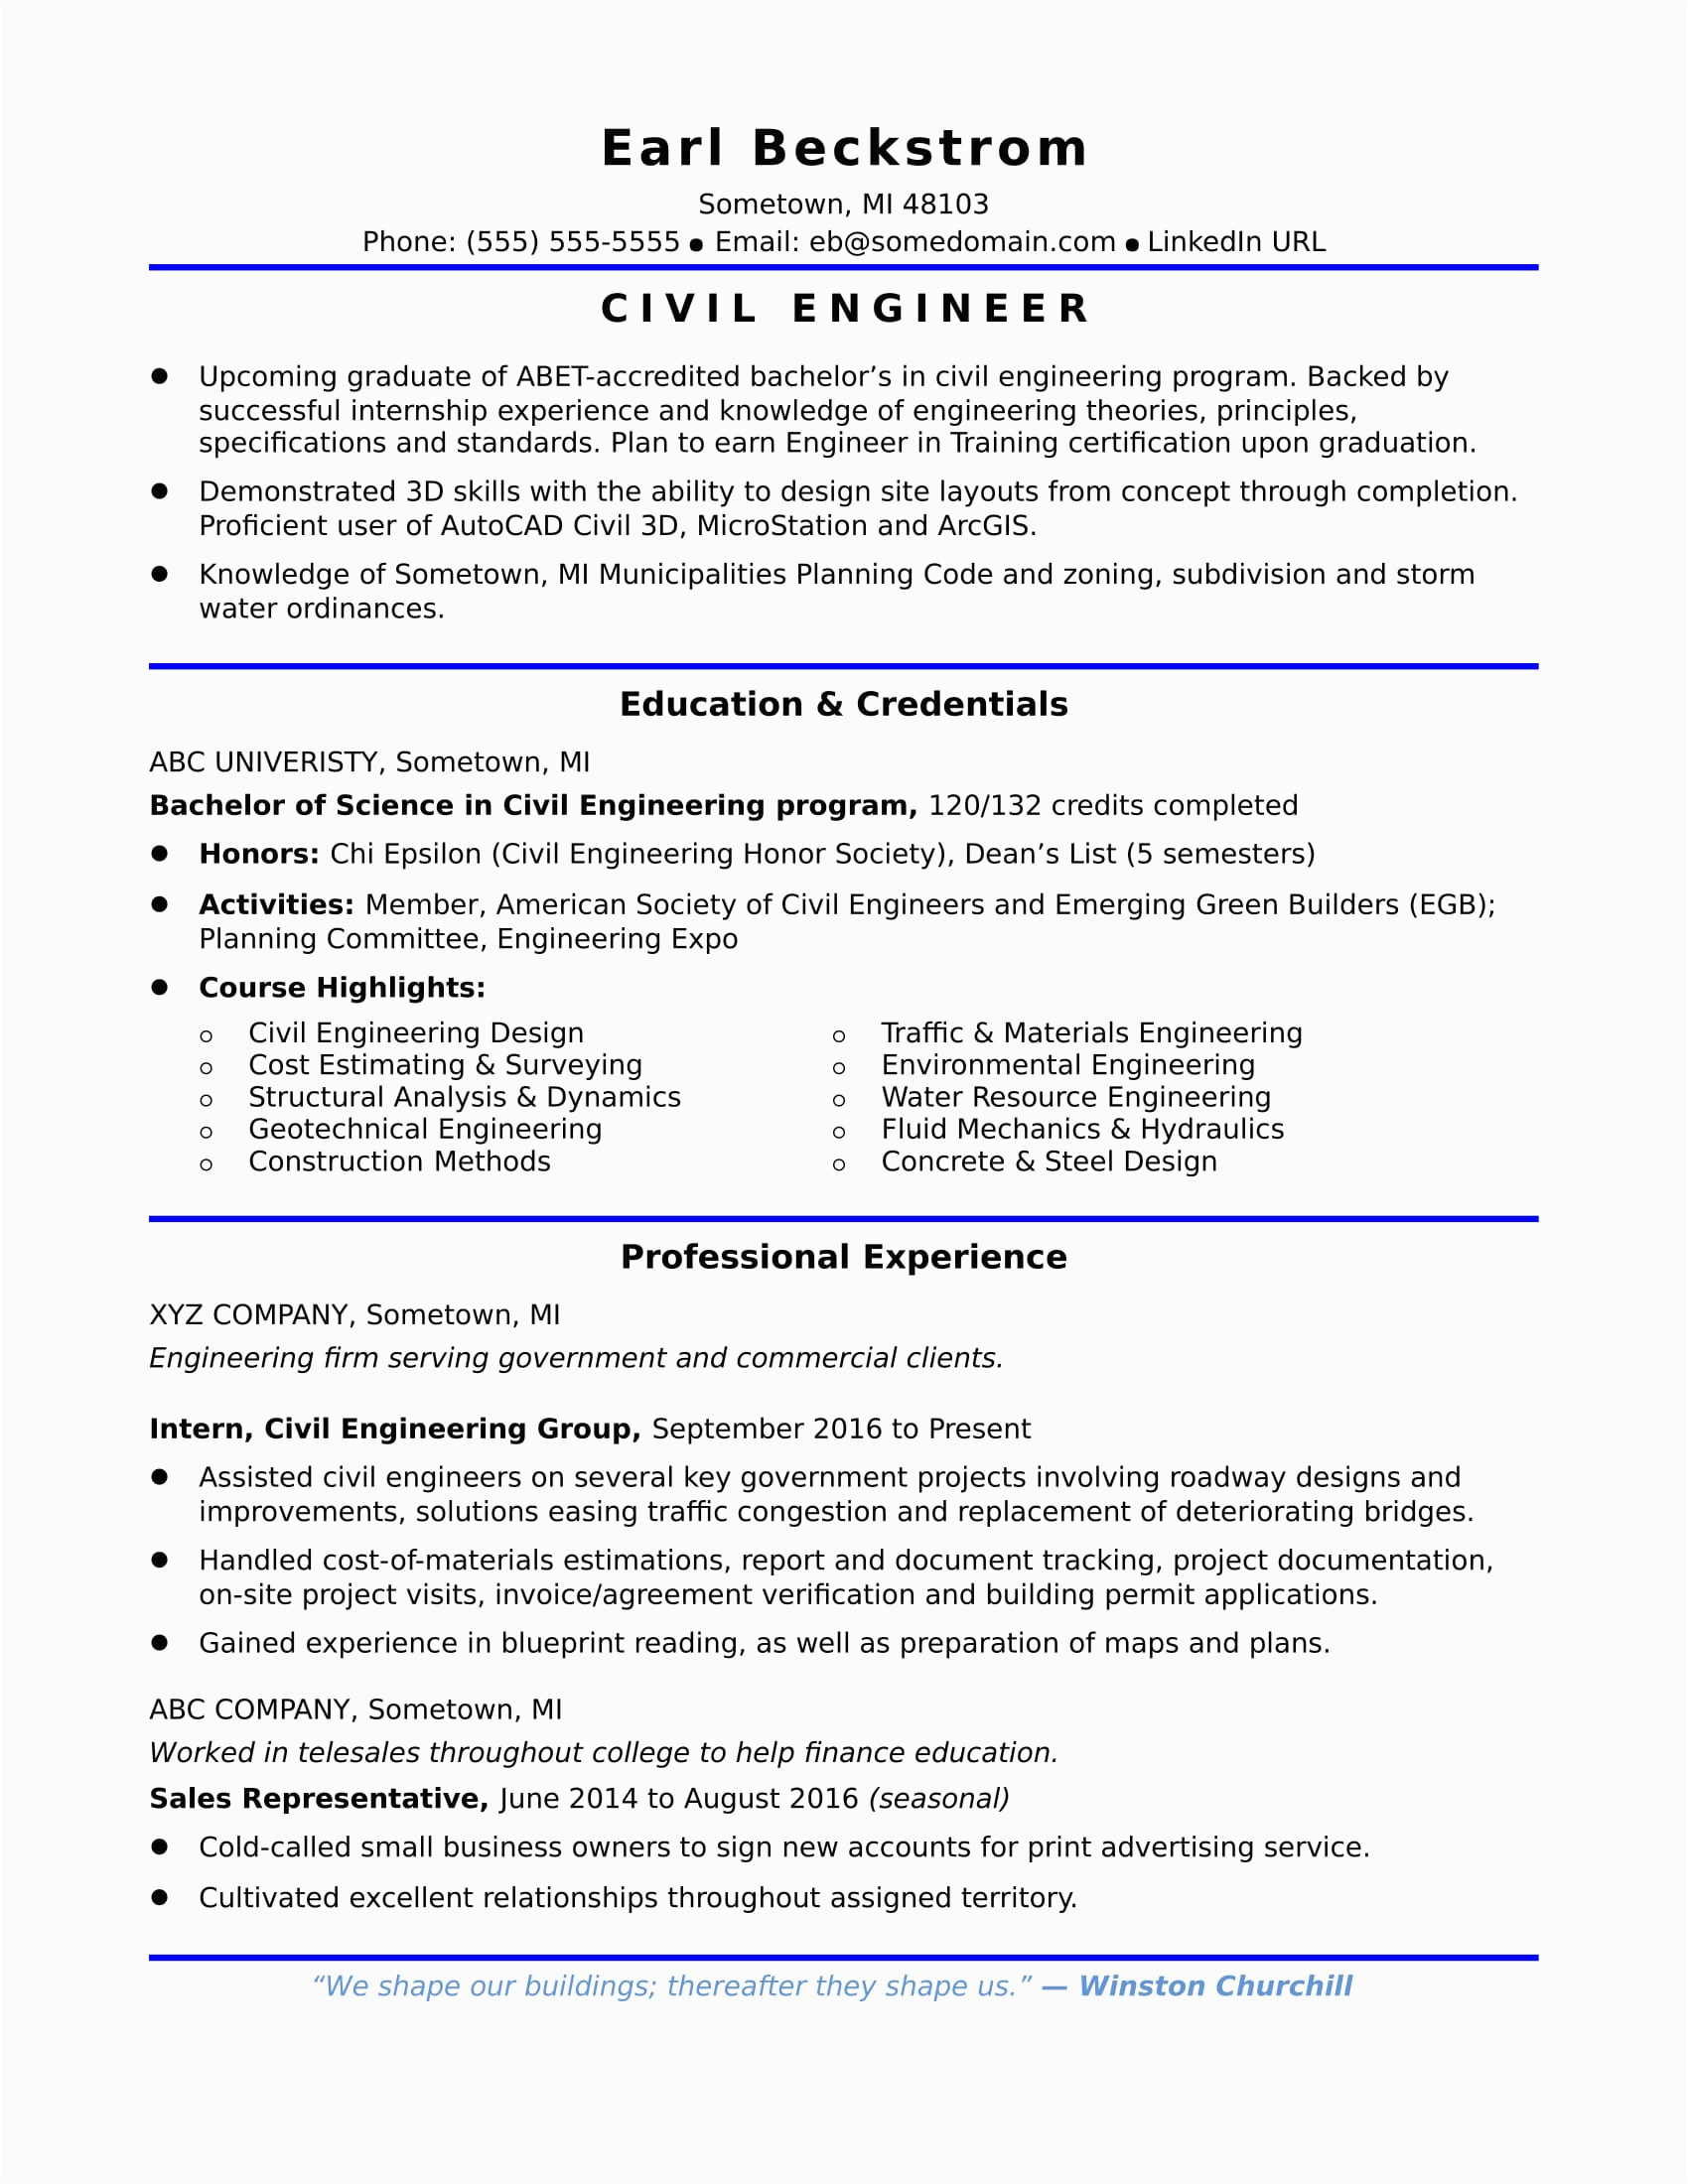 Sample Objective Statement for Sustainable Building Grad Resume Resume Objective Example Civil Engineer Best Career Objectives to